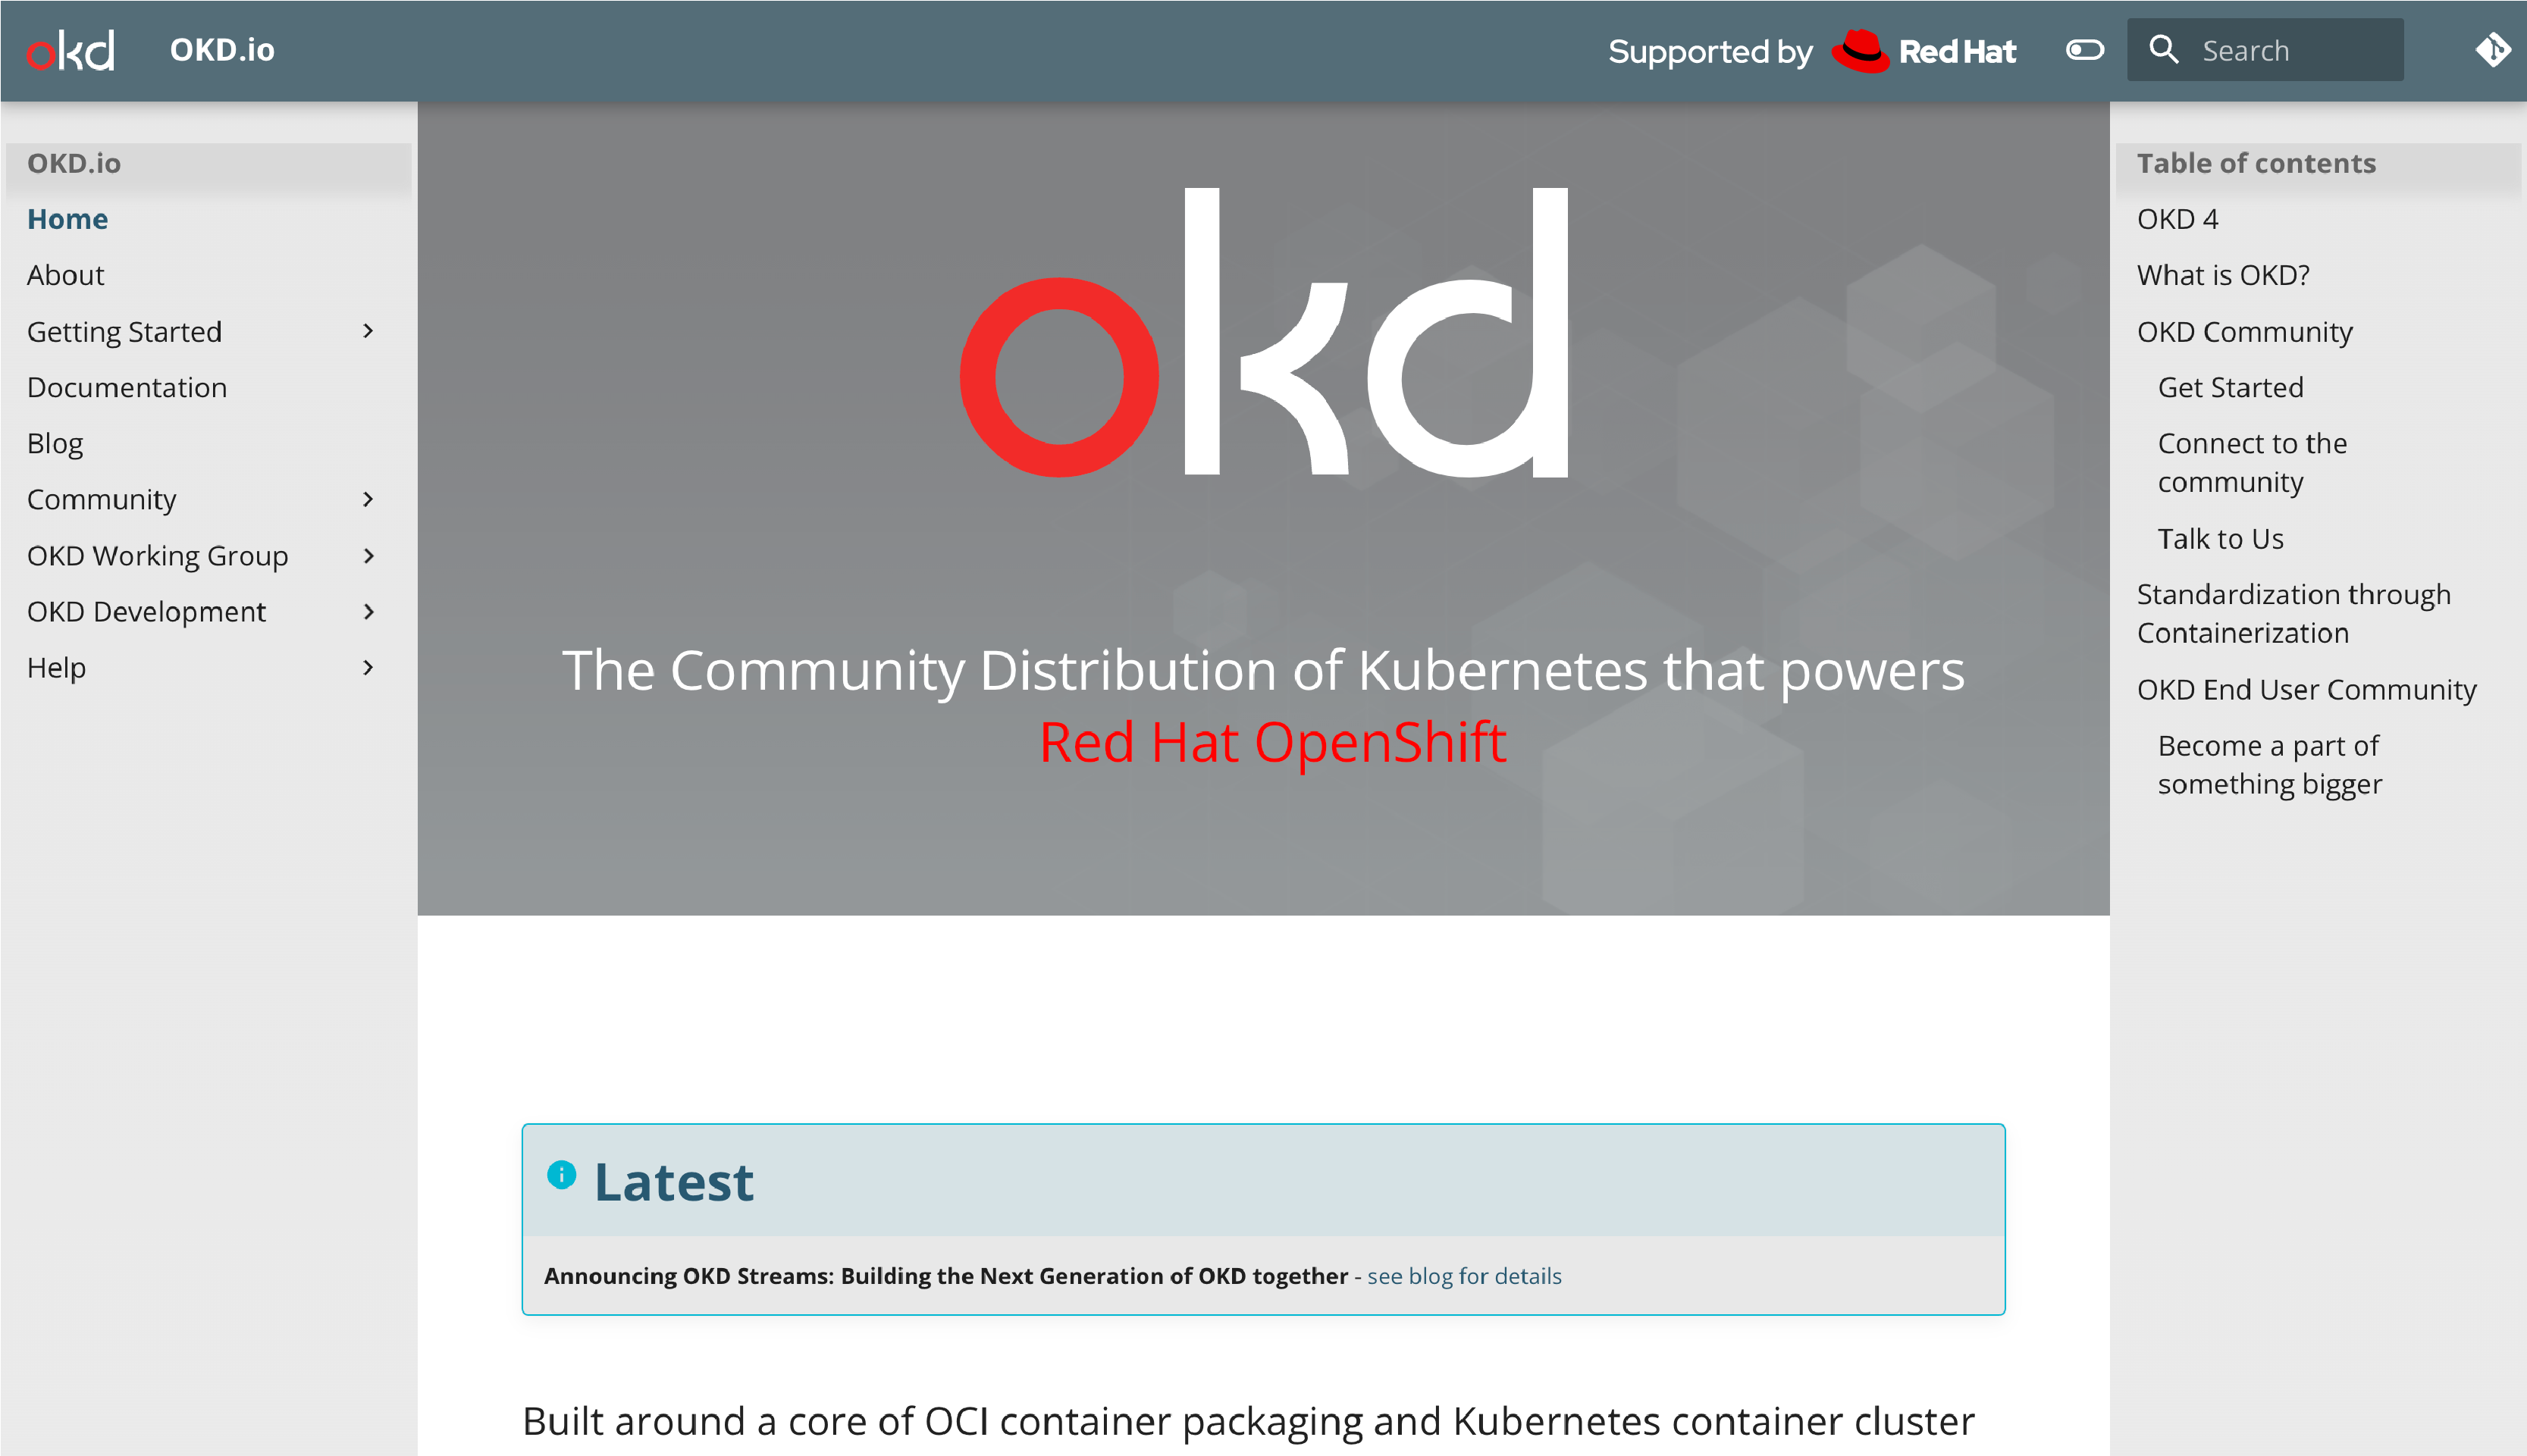 The OKD.io open source community website with a “Supported by Red Hat” endorsement logo at the top.